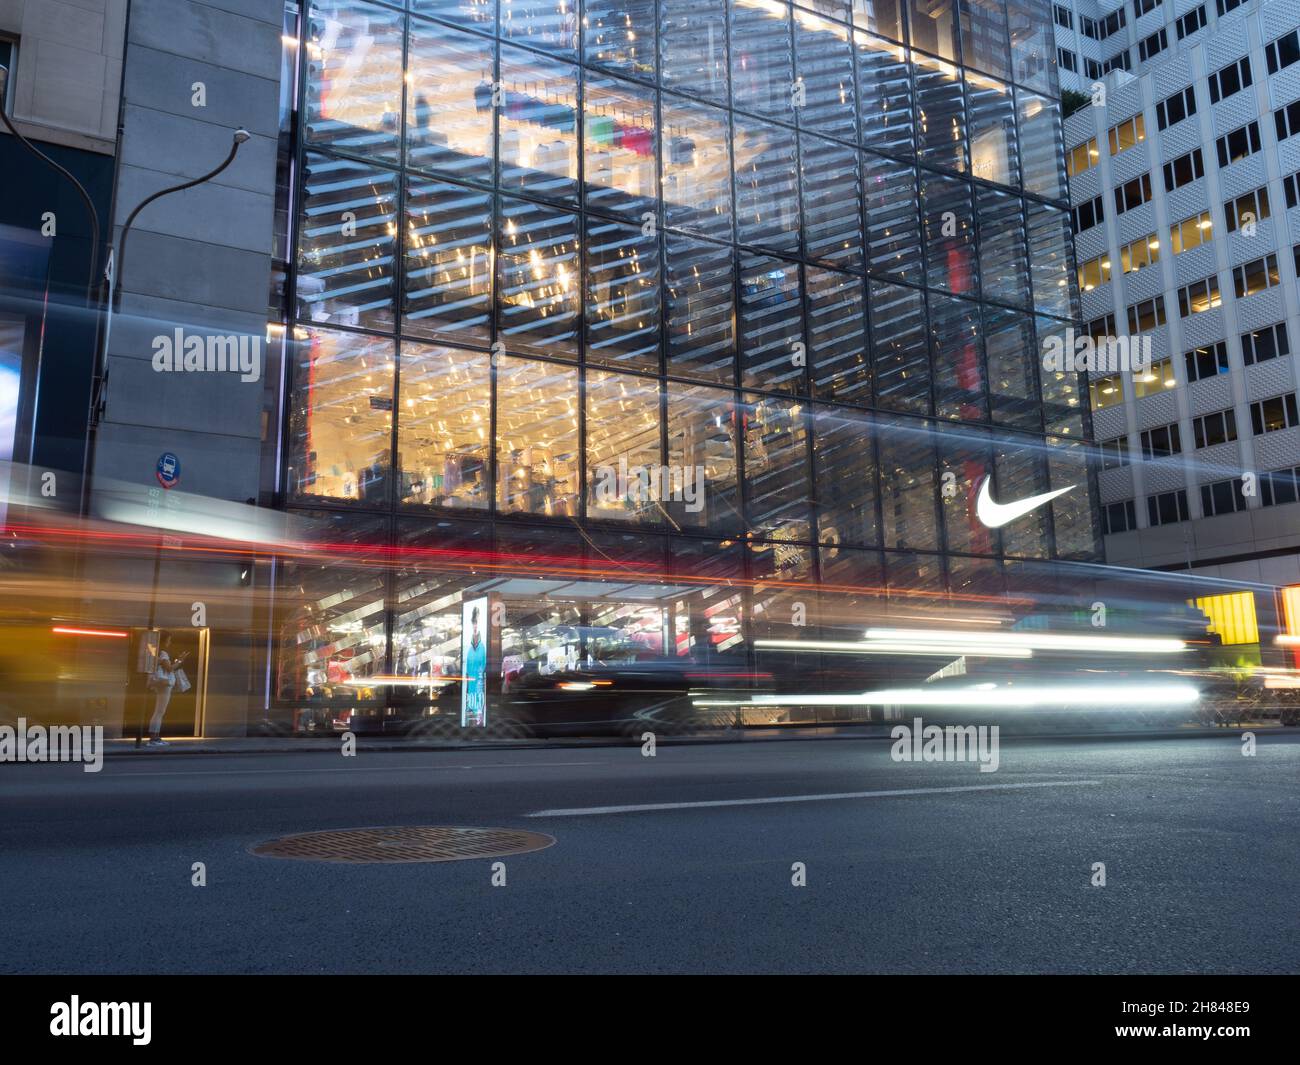 Image of the Nike store located on 5th Avenue Stock Photo - Alamy